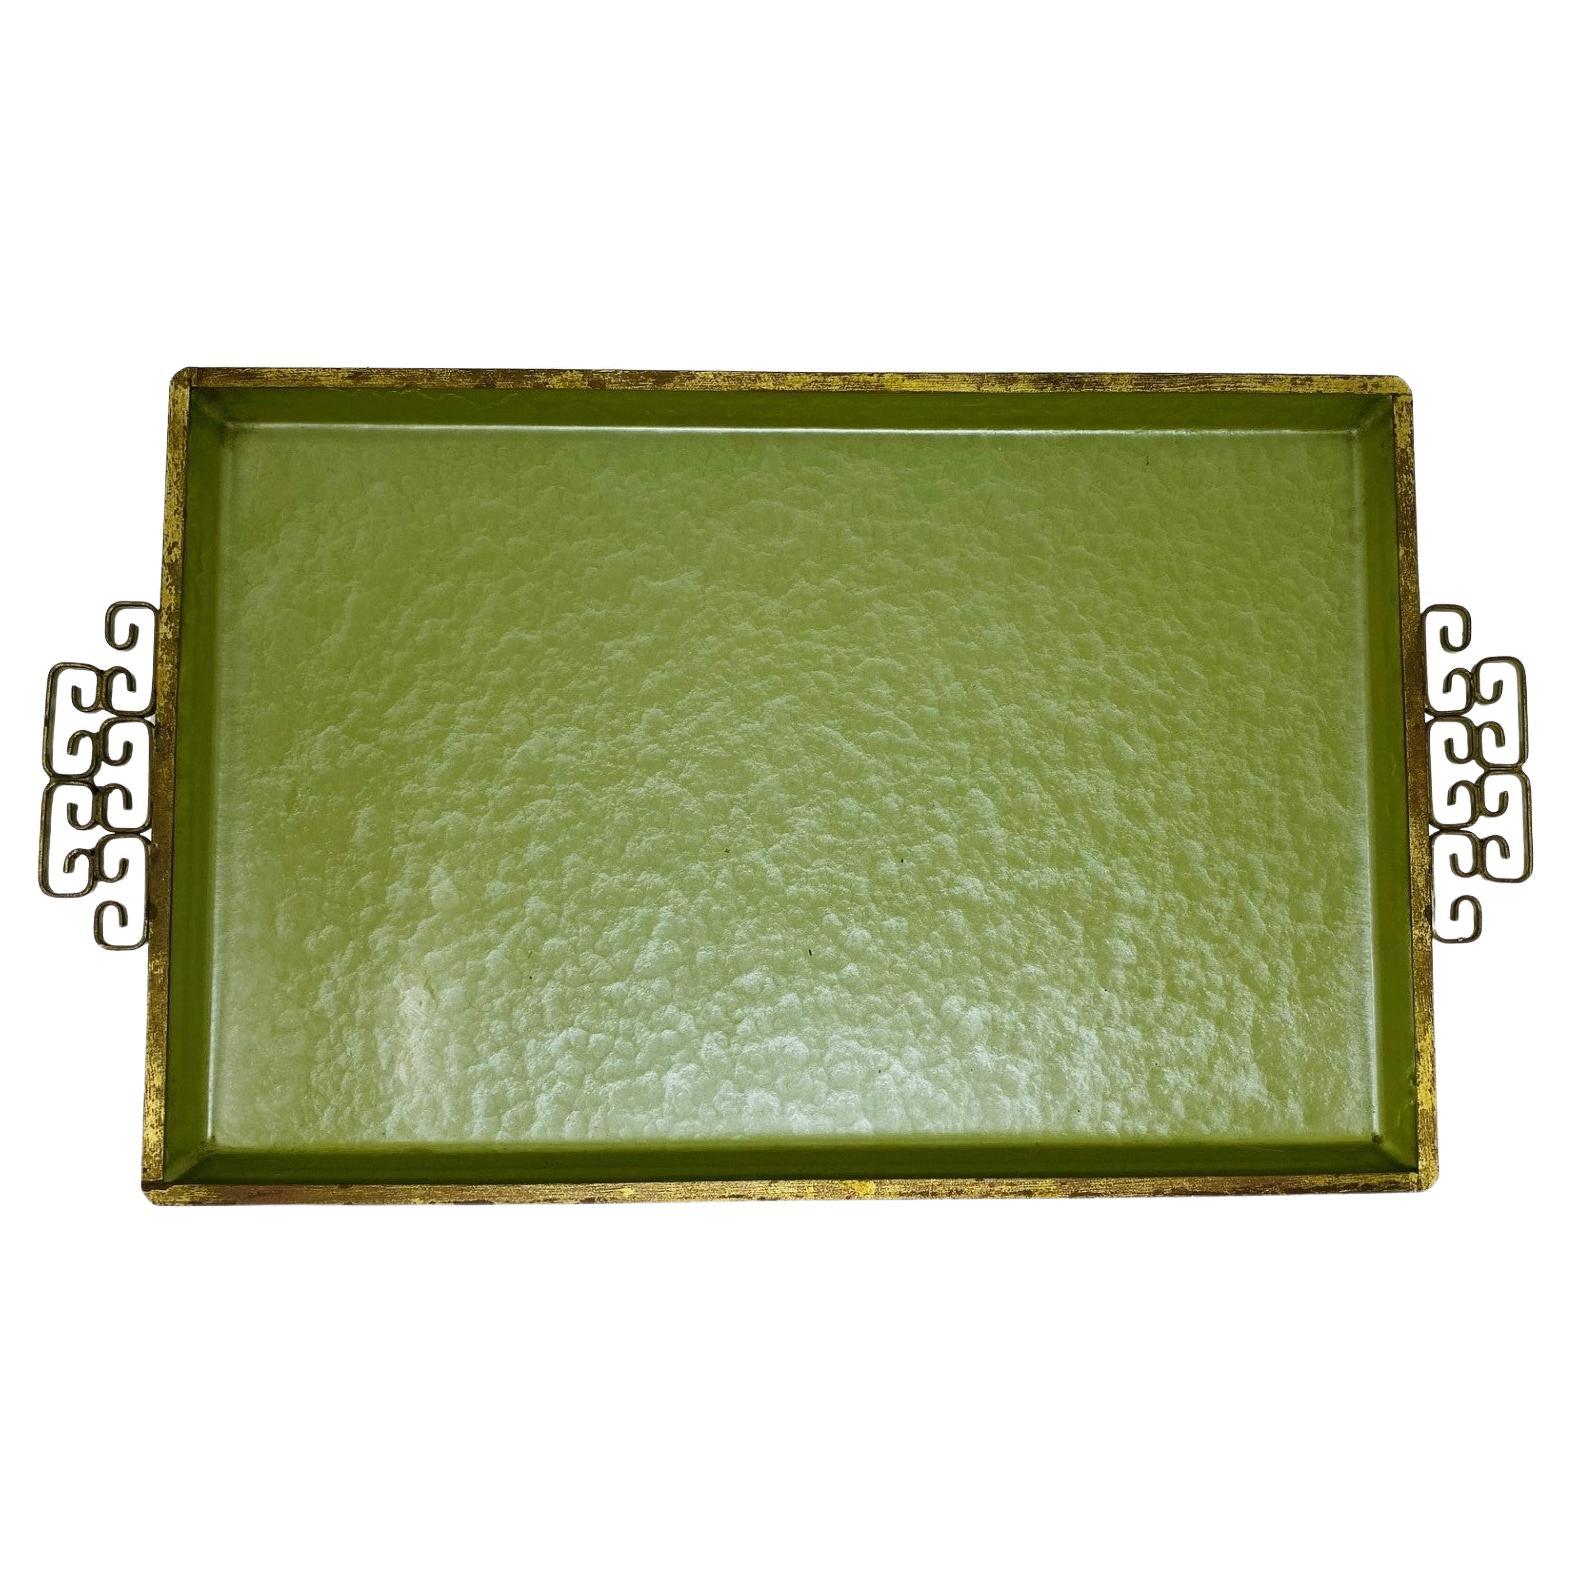 Vintage Mid Century Kyes Moire’ Glaze Brass and Enamel Green Tray 1960s